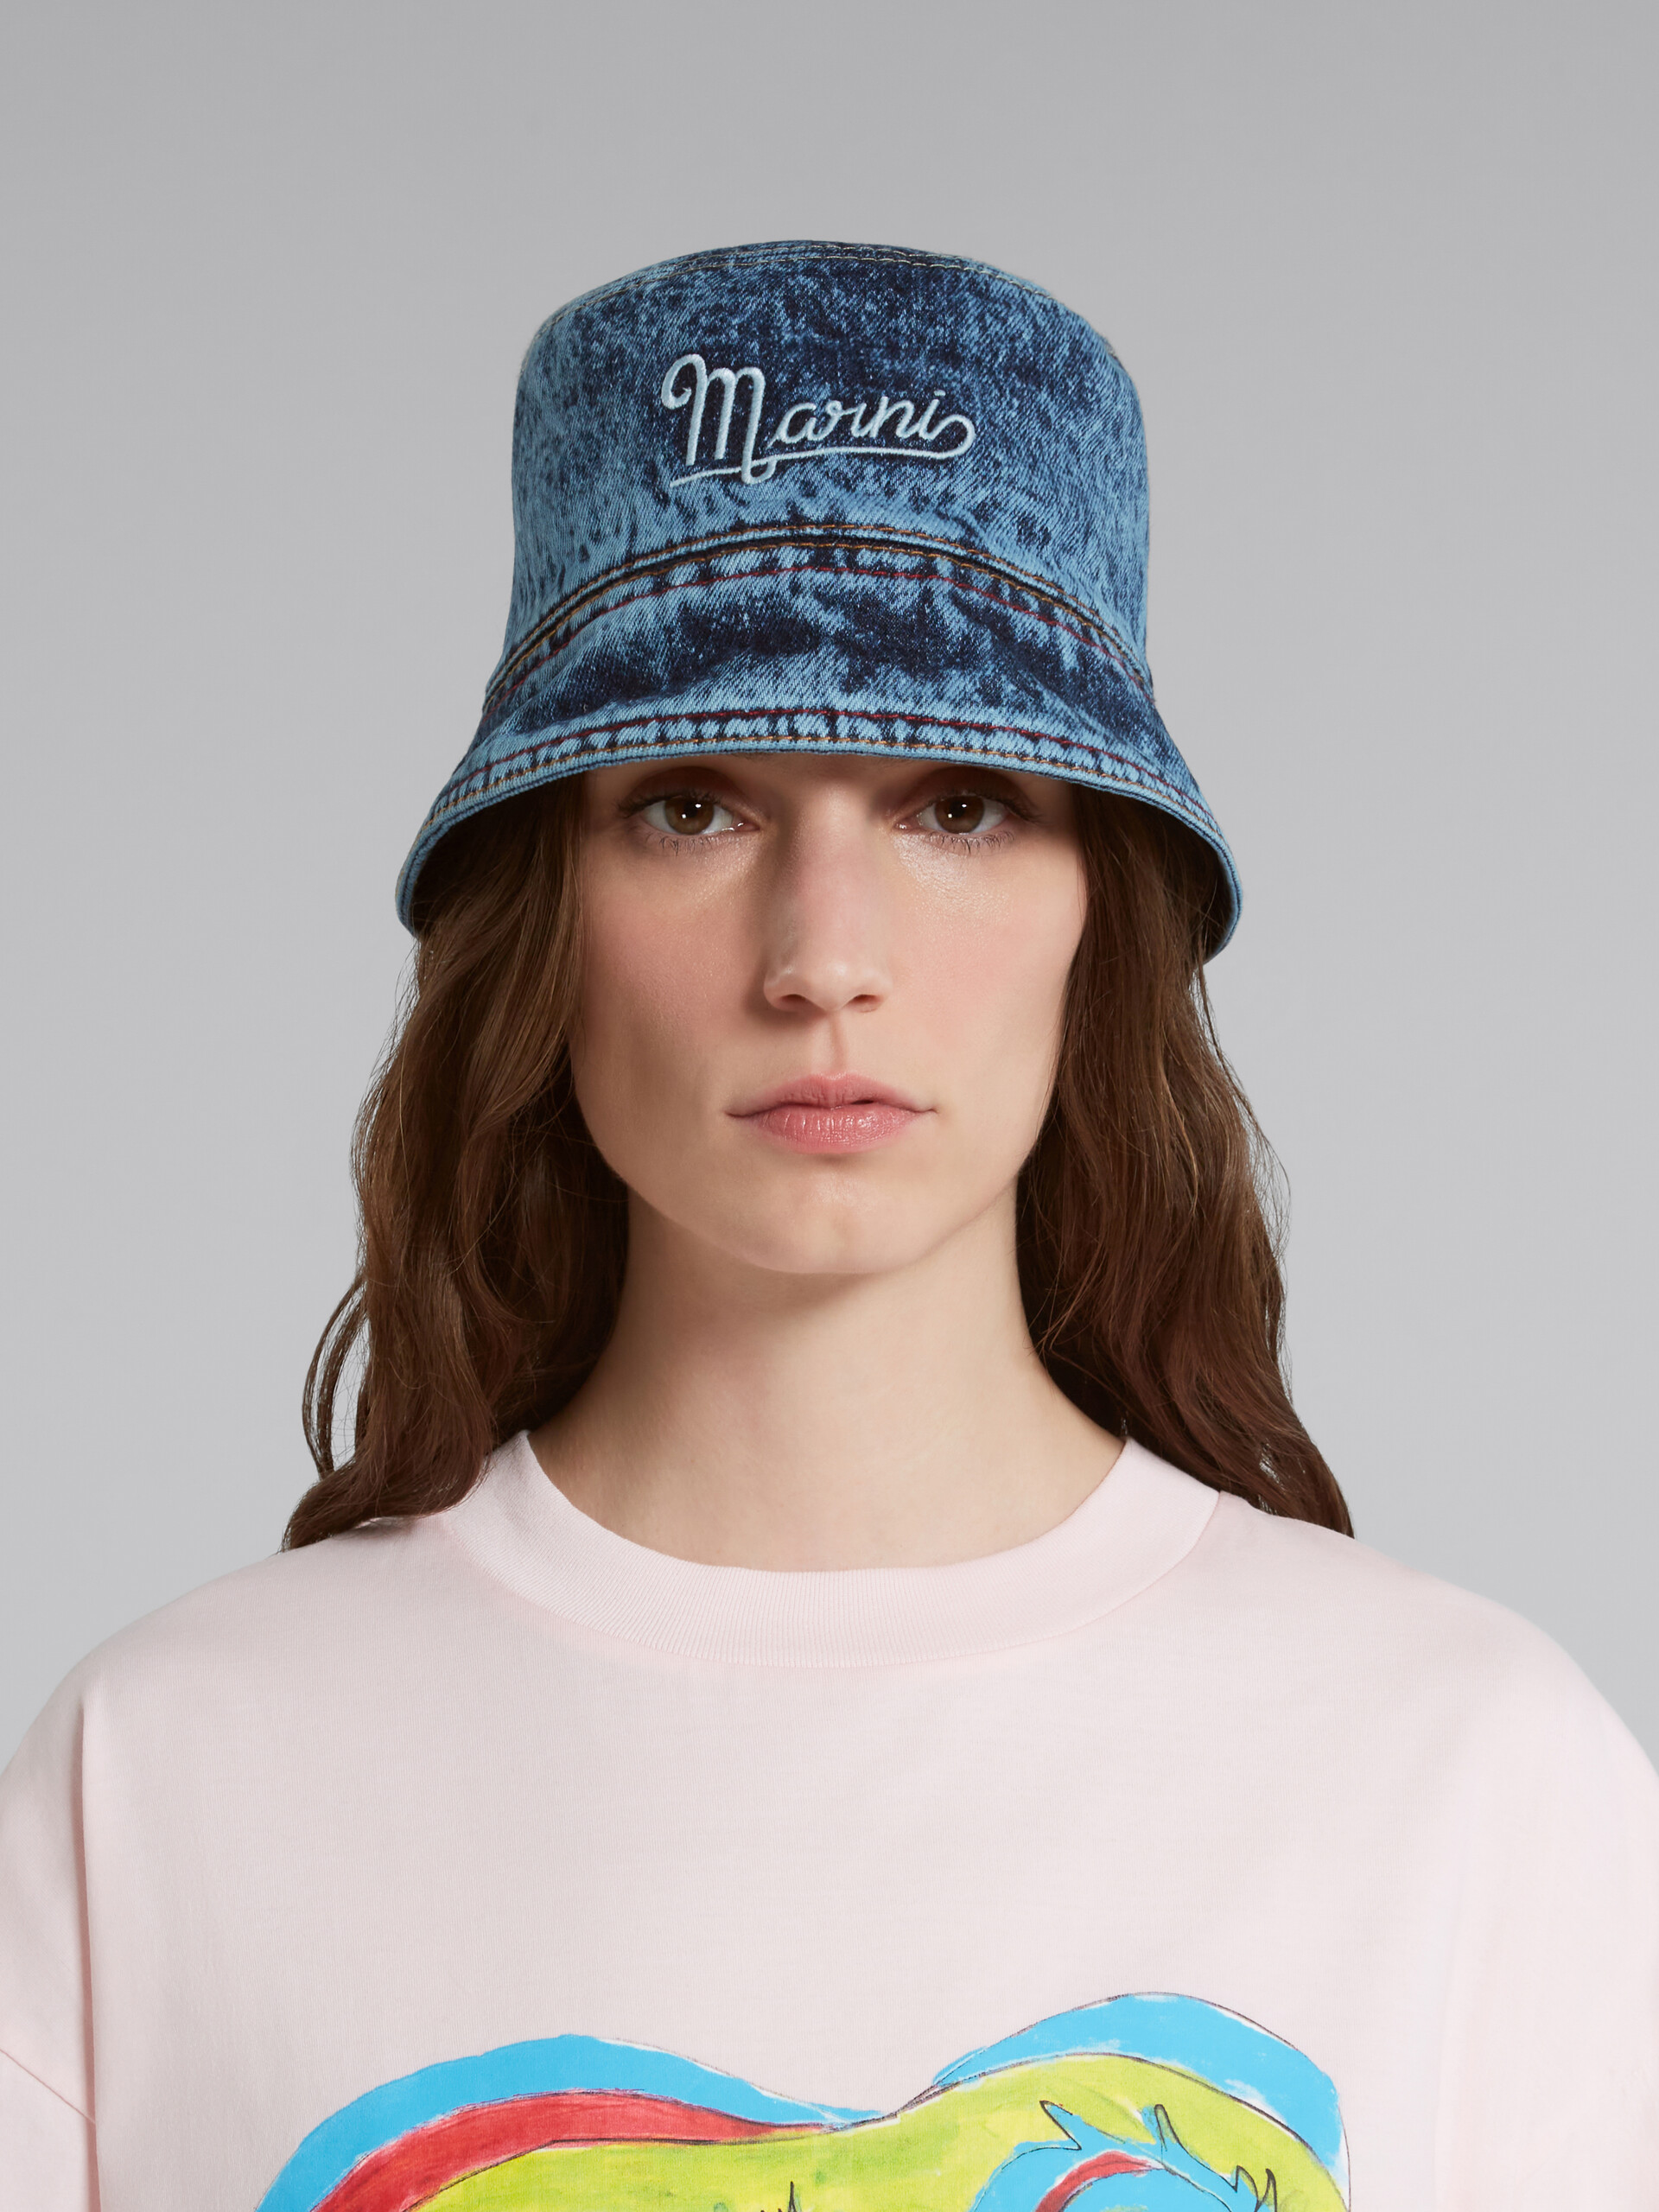 Blue denim bucket hat with marble-dyed finish